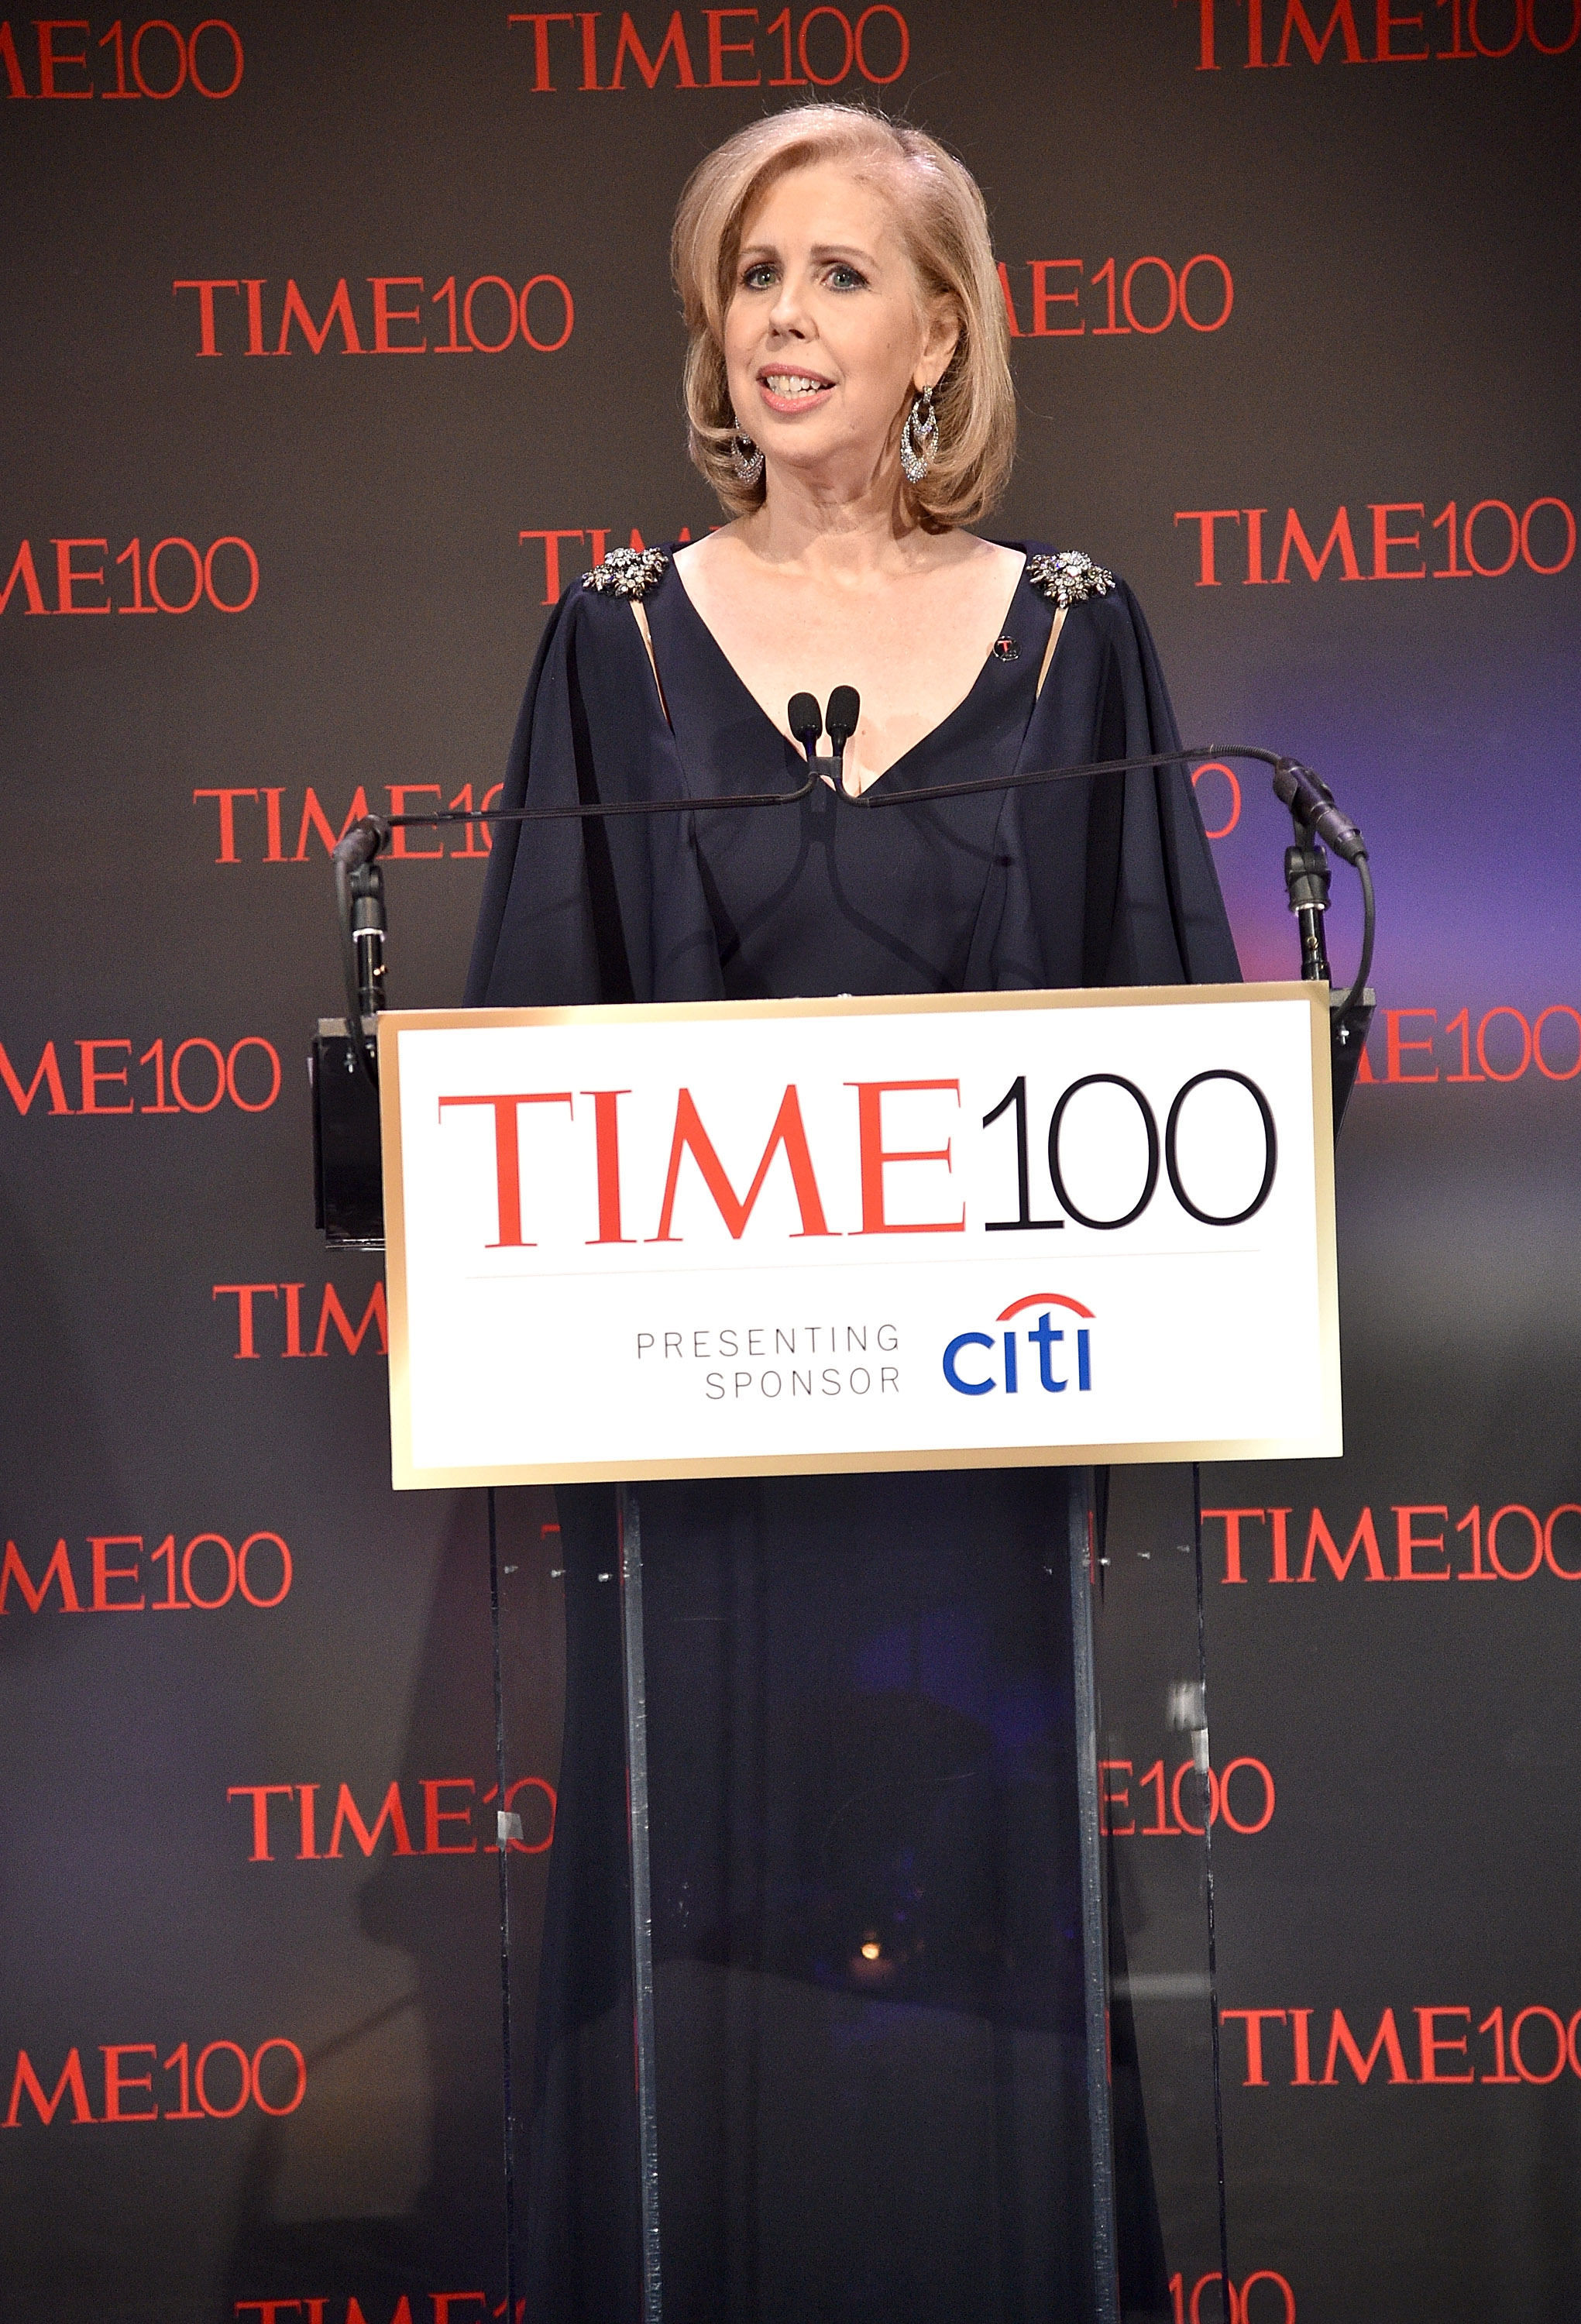 TIME managing editor Nancy Gibbs speaks during 2017 Time 100 Gala at Jazz at Lincoln Center on April 25, 2017 in New York City. (Kevin Mazur—Getty Images for TIME)